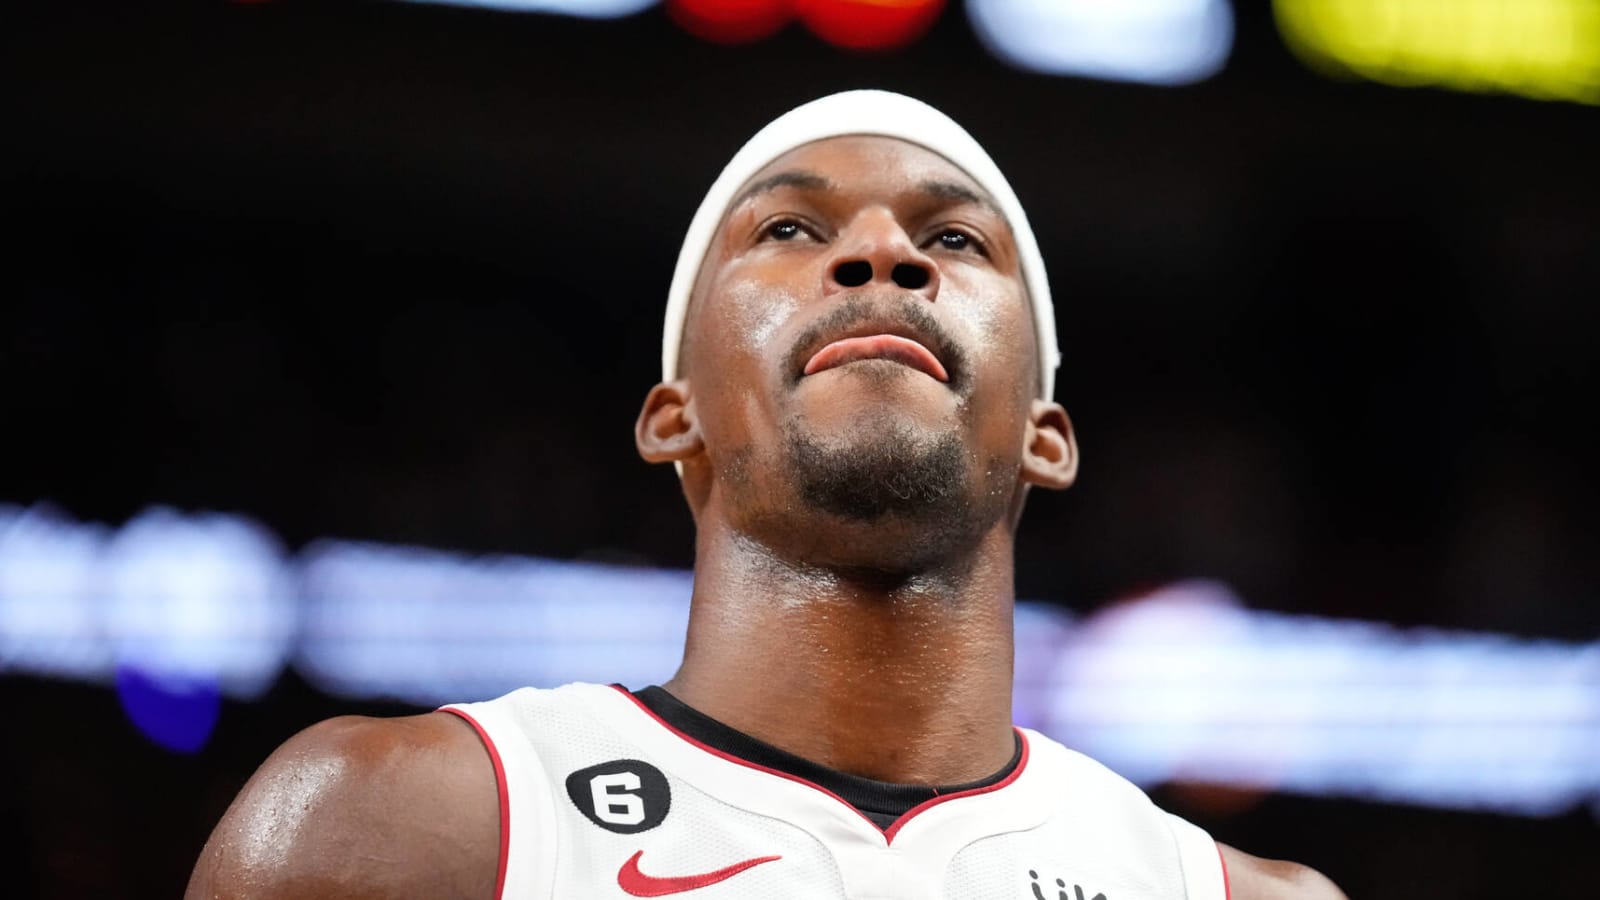 Jimmy Butler's return lifts Heat to 2-1 series lead